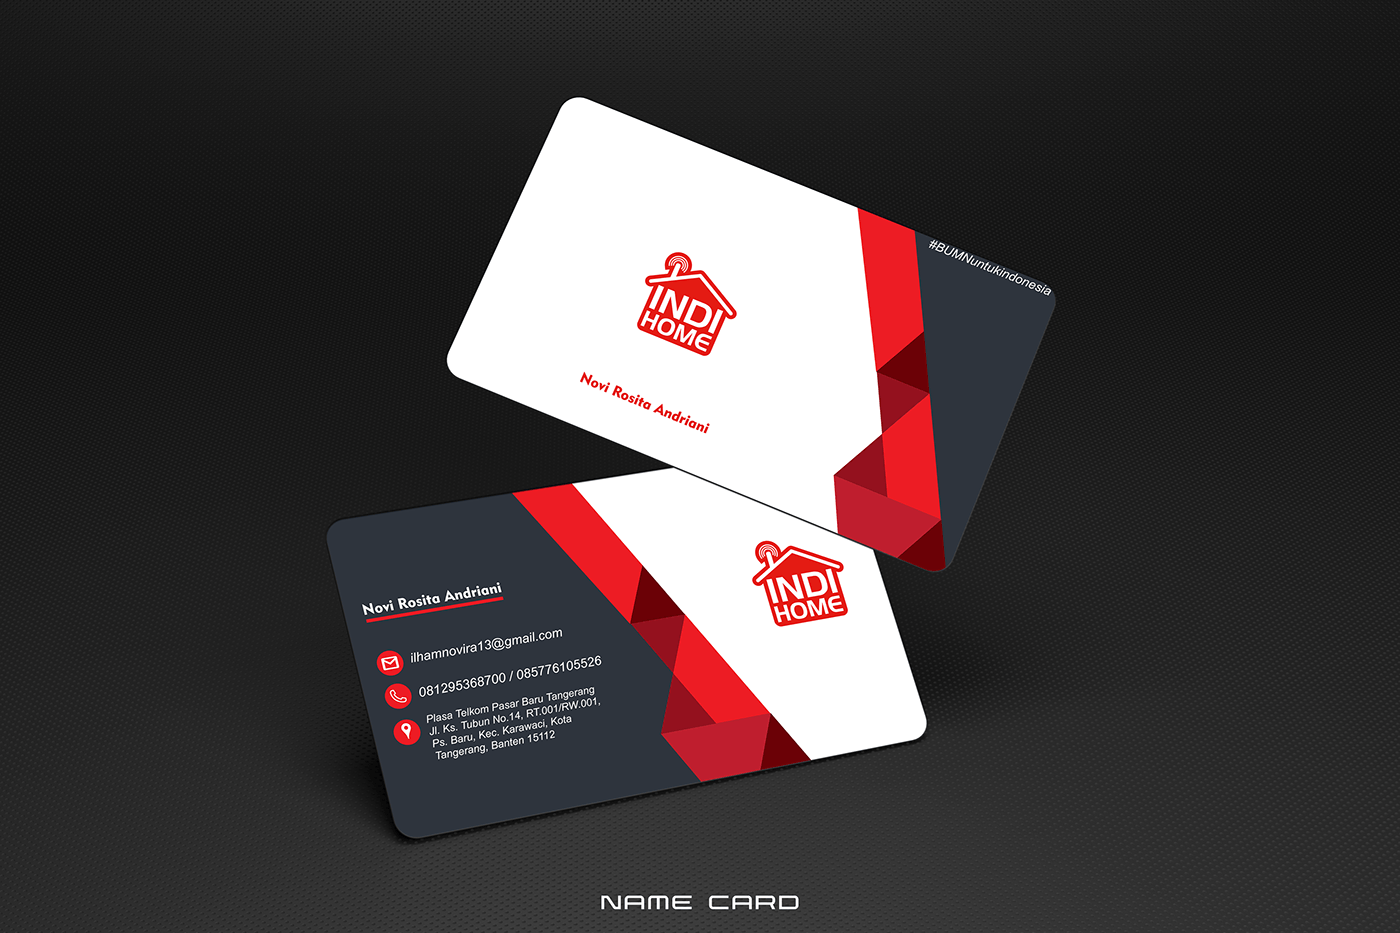 Name card business brand identity Travel adventure plane car Vehicle Fly relation